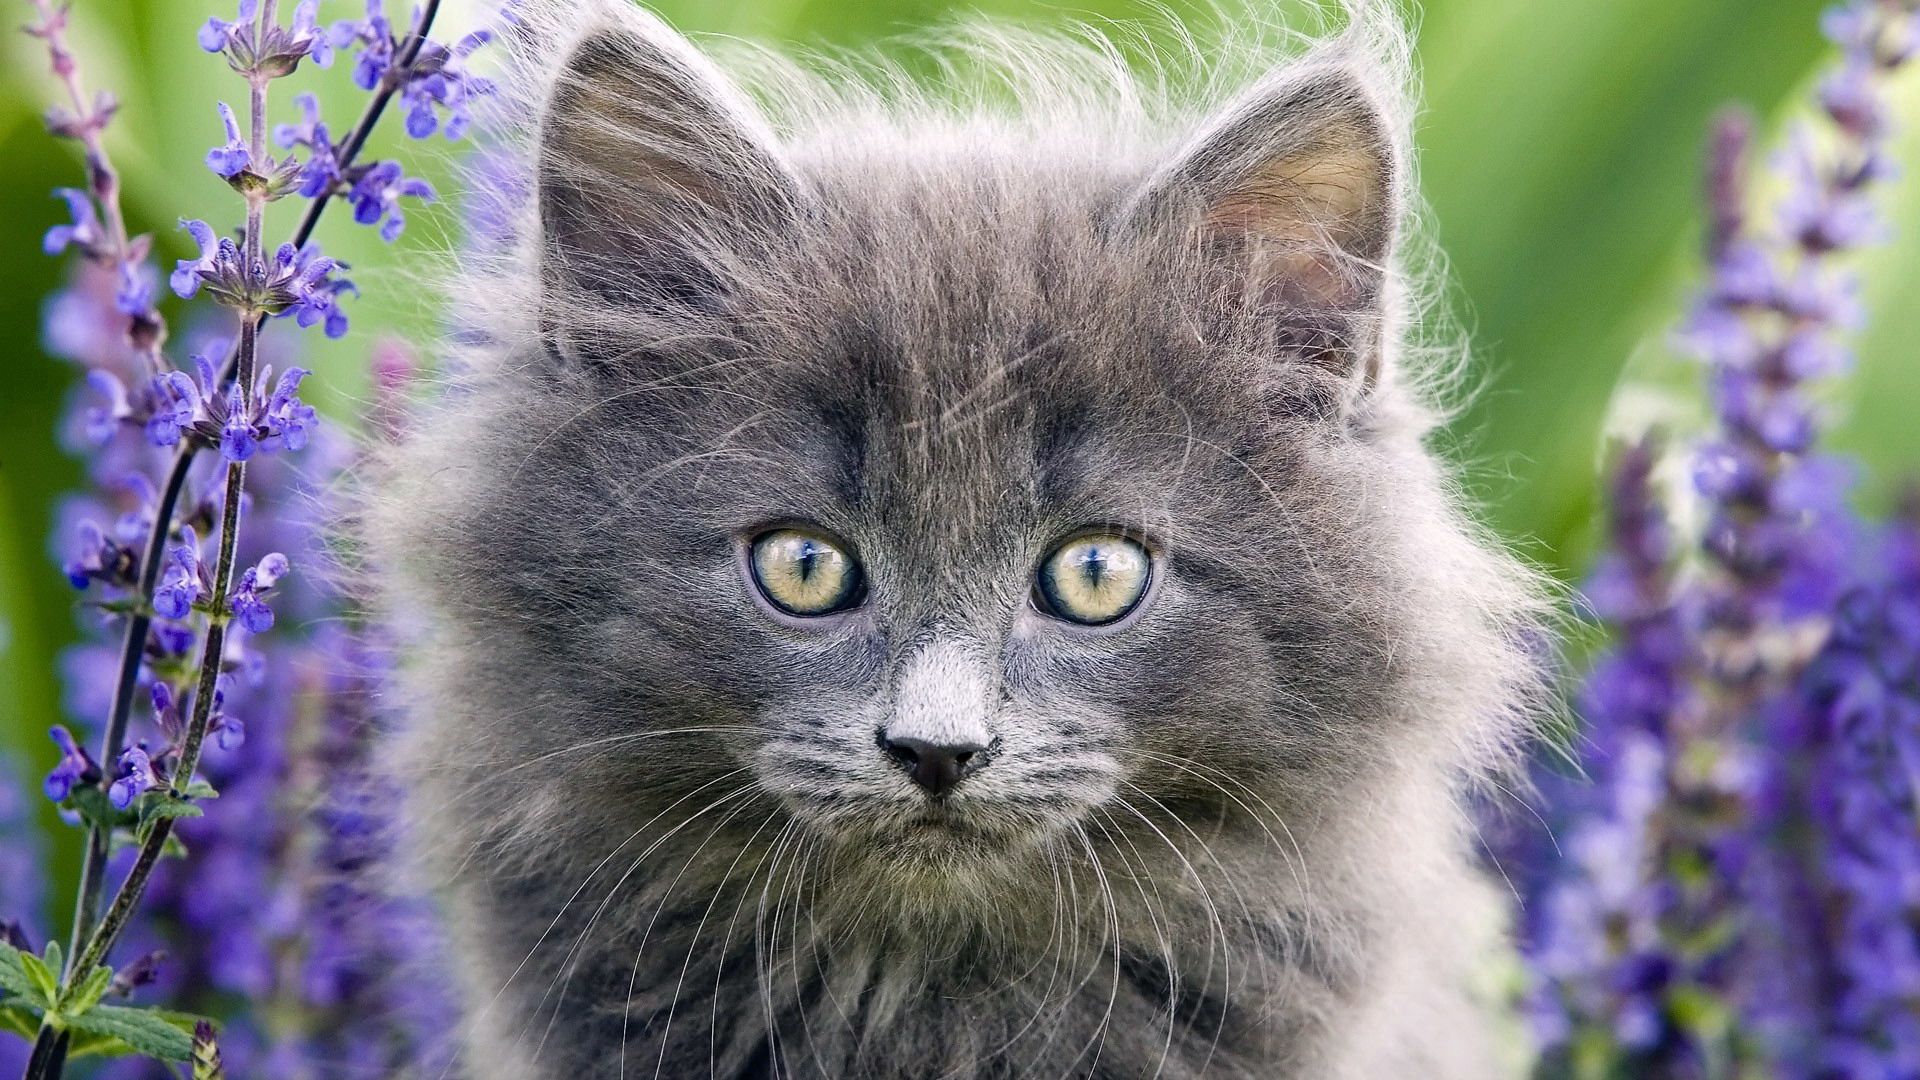 android kittens, animals, grass, fluffy, muzzle, sight, opinion